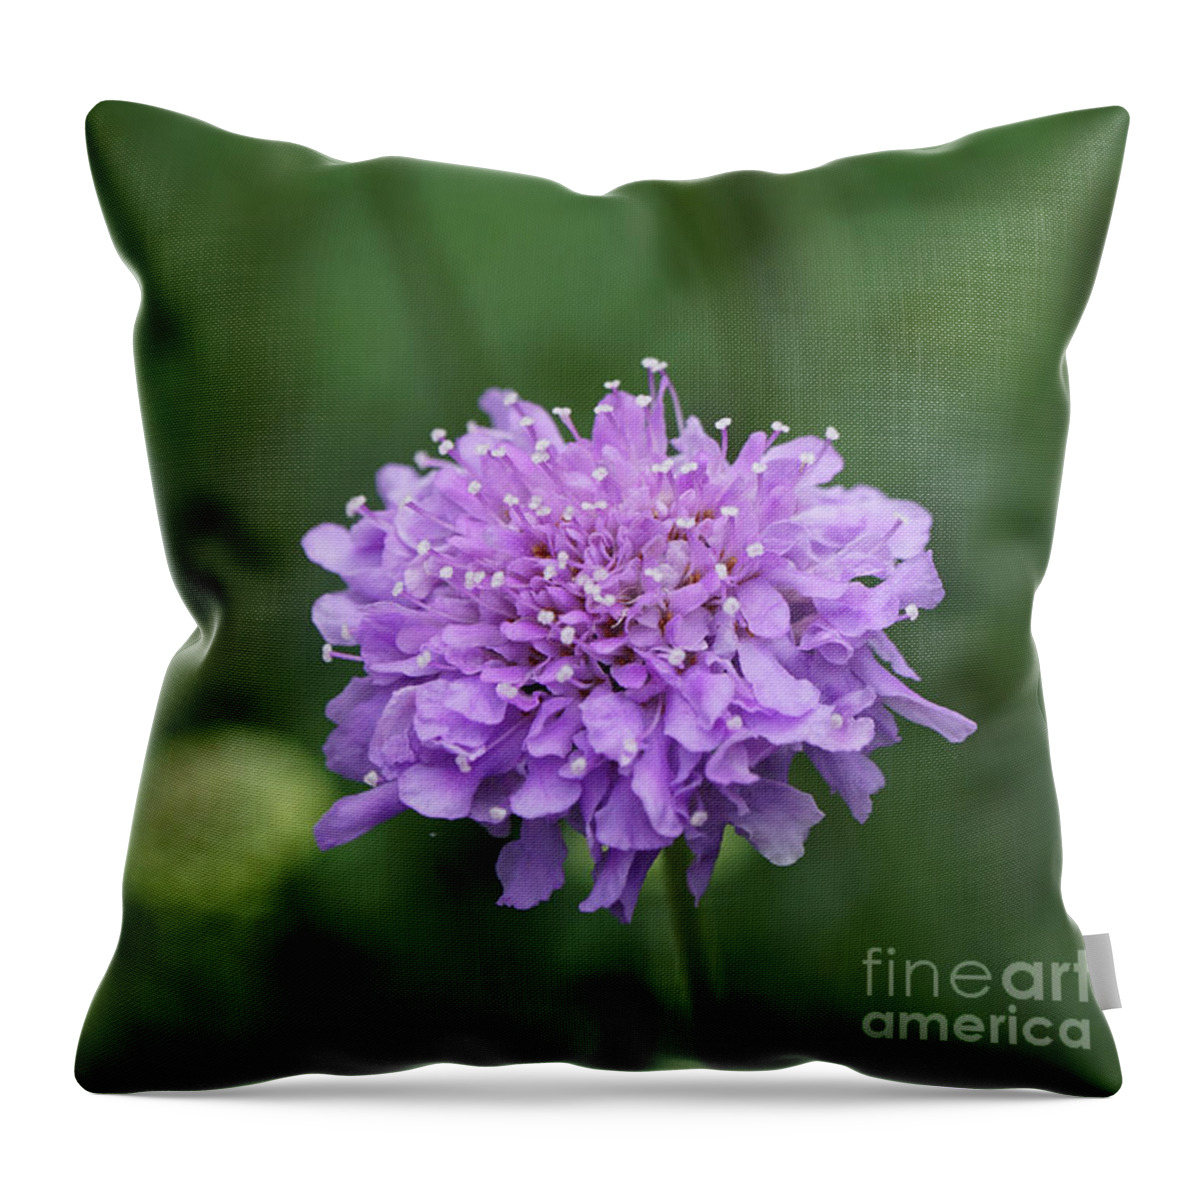 Pincushion Throw Pillow featuring the photograph Pinchsion Flower by Robert E Alter Reflections of Infinity